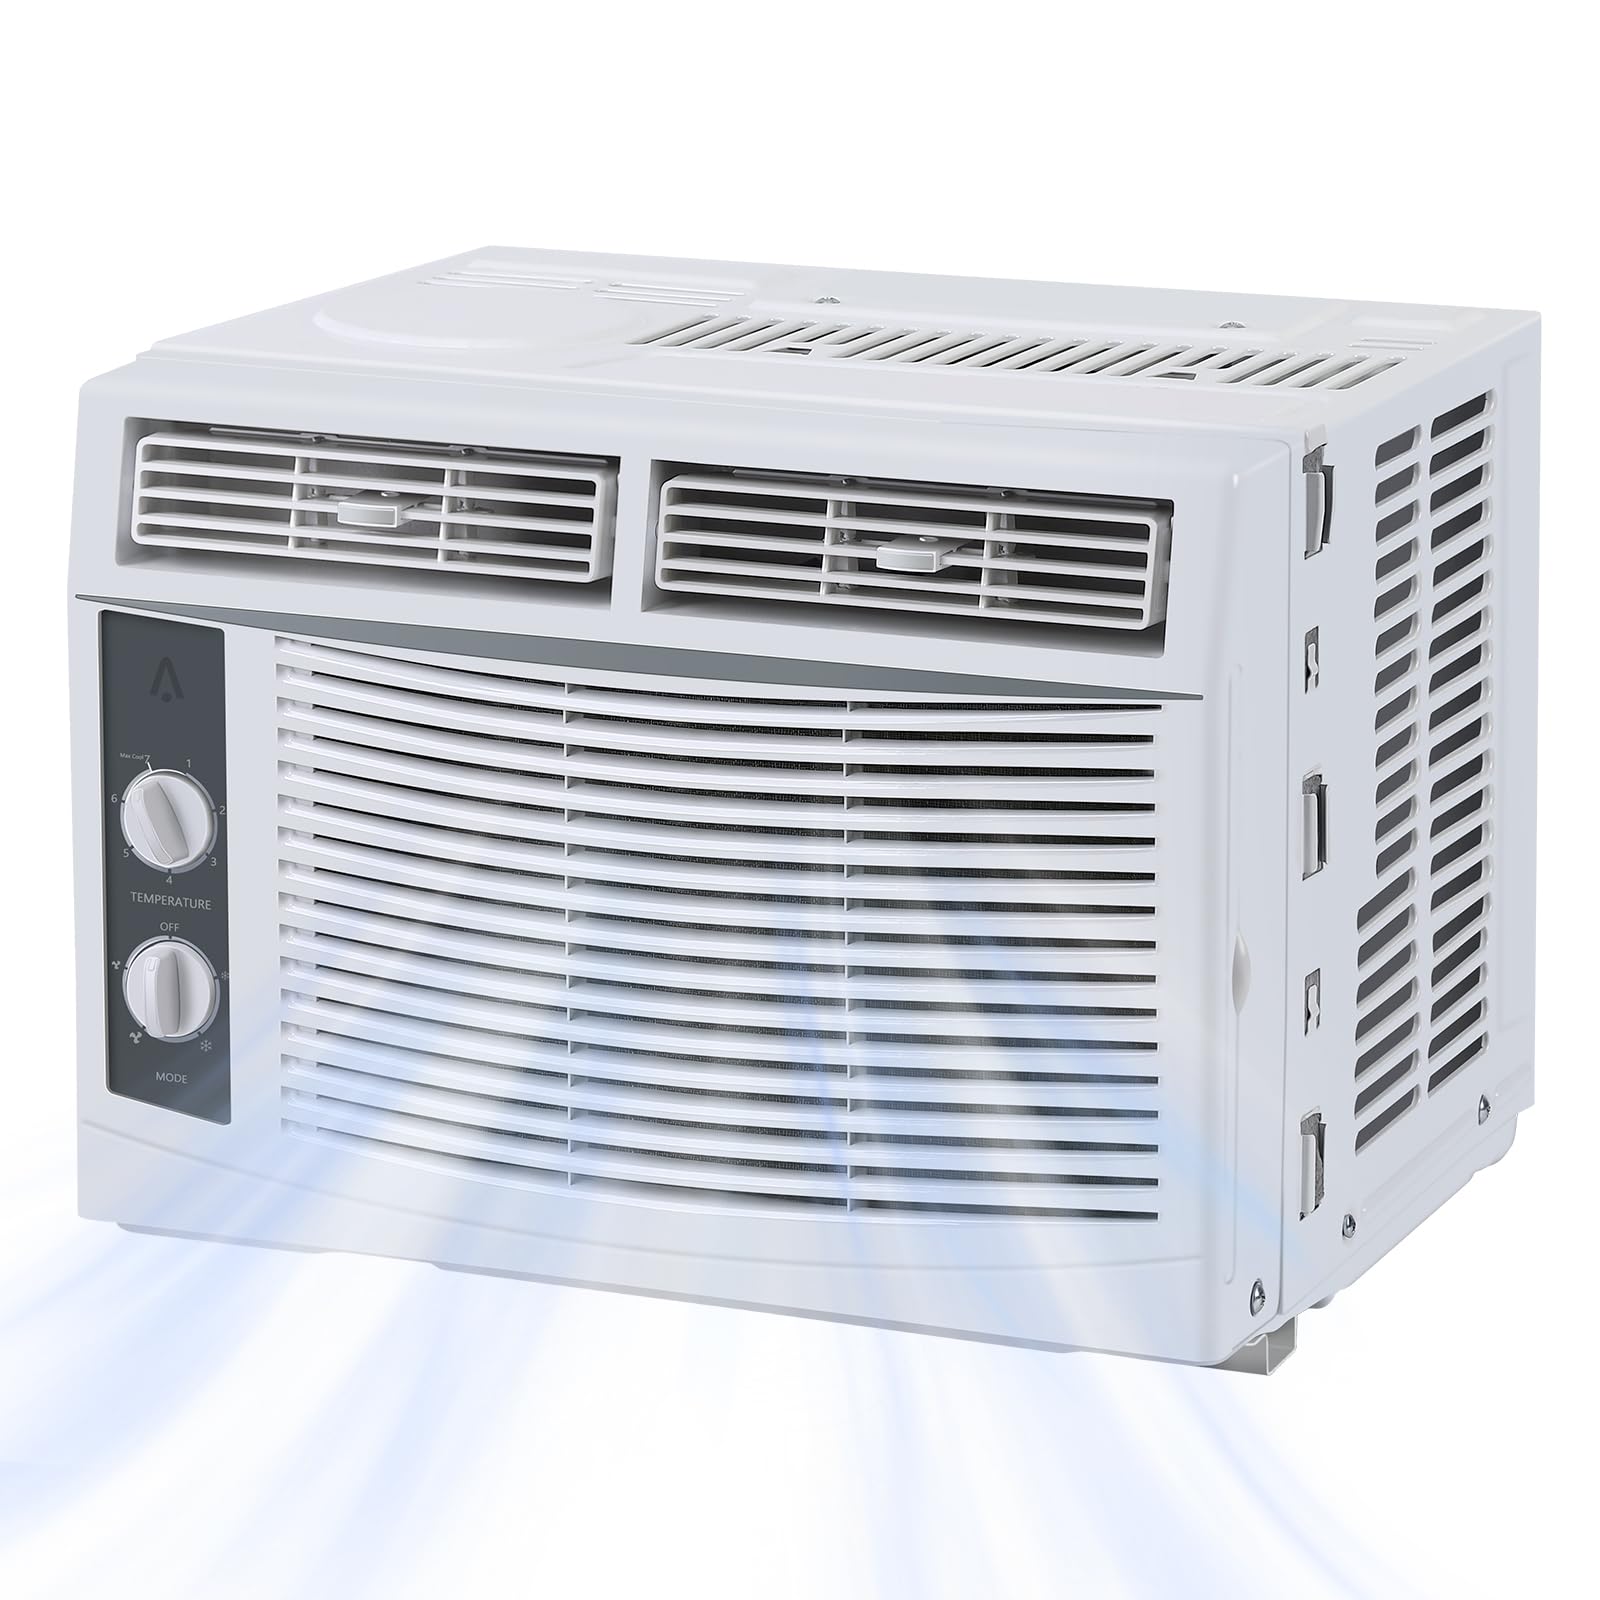 GAOMON 5,000 BTU Window Mounted Air Conditioner - Efficient Cooling Small Window AC Units with Easy-to-Use Mechanical Controls and Washable Filter, Cool up to 150 Sq.Ft., 110-115V